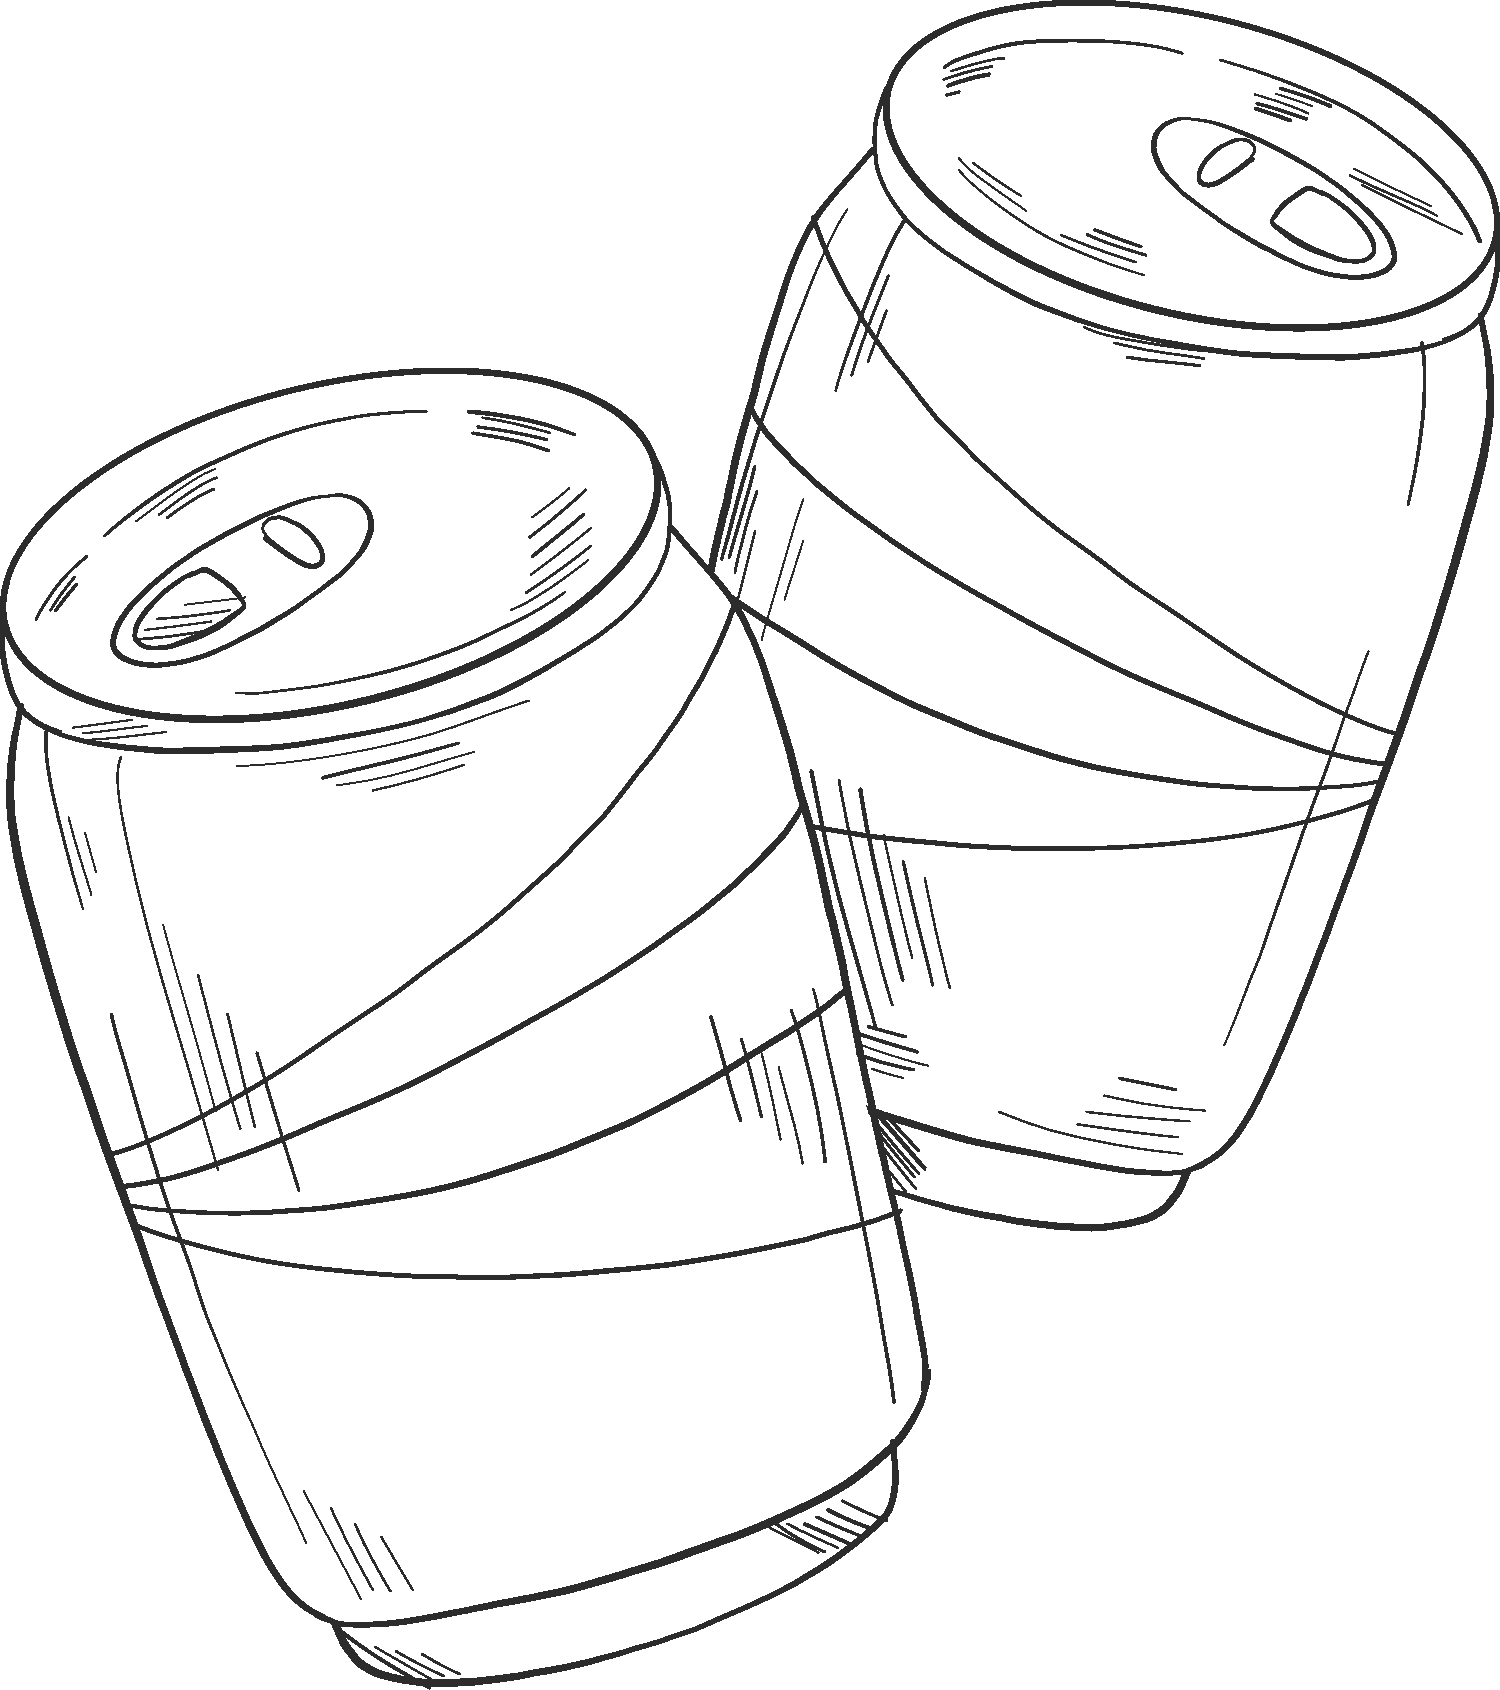 Soda Cans coloring page - ColouringPages